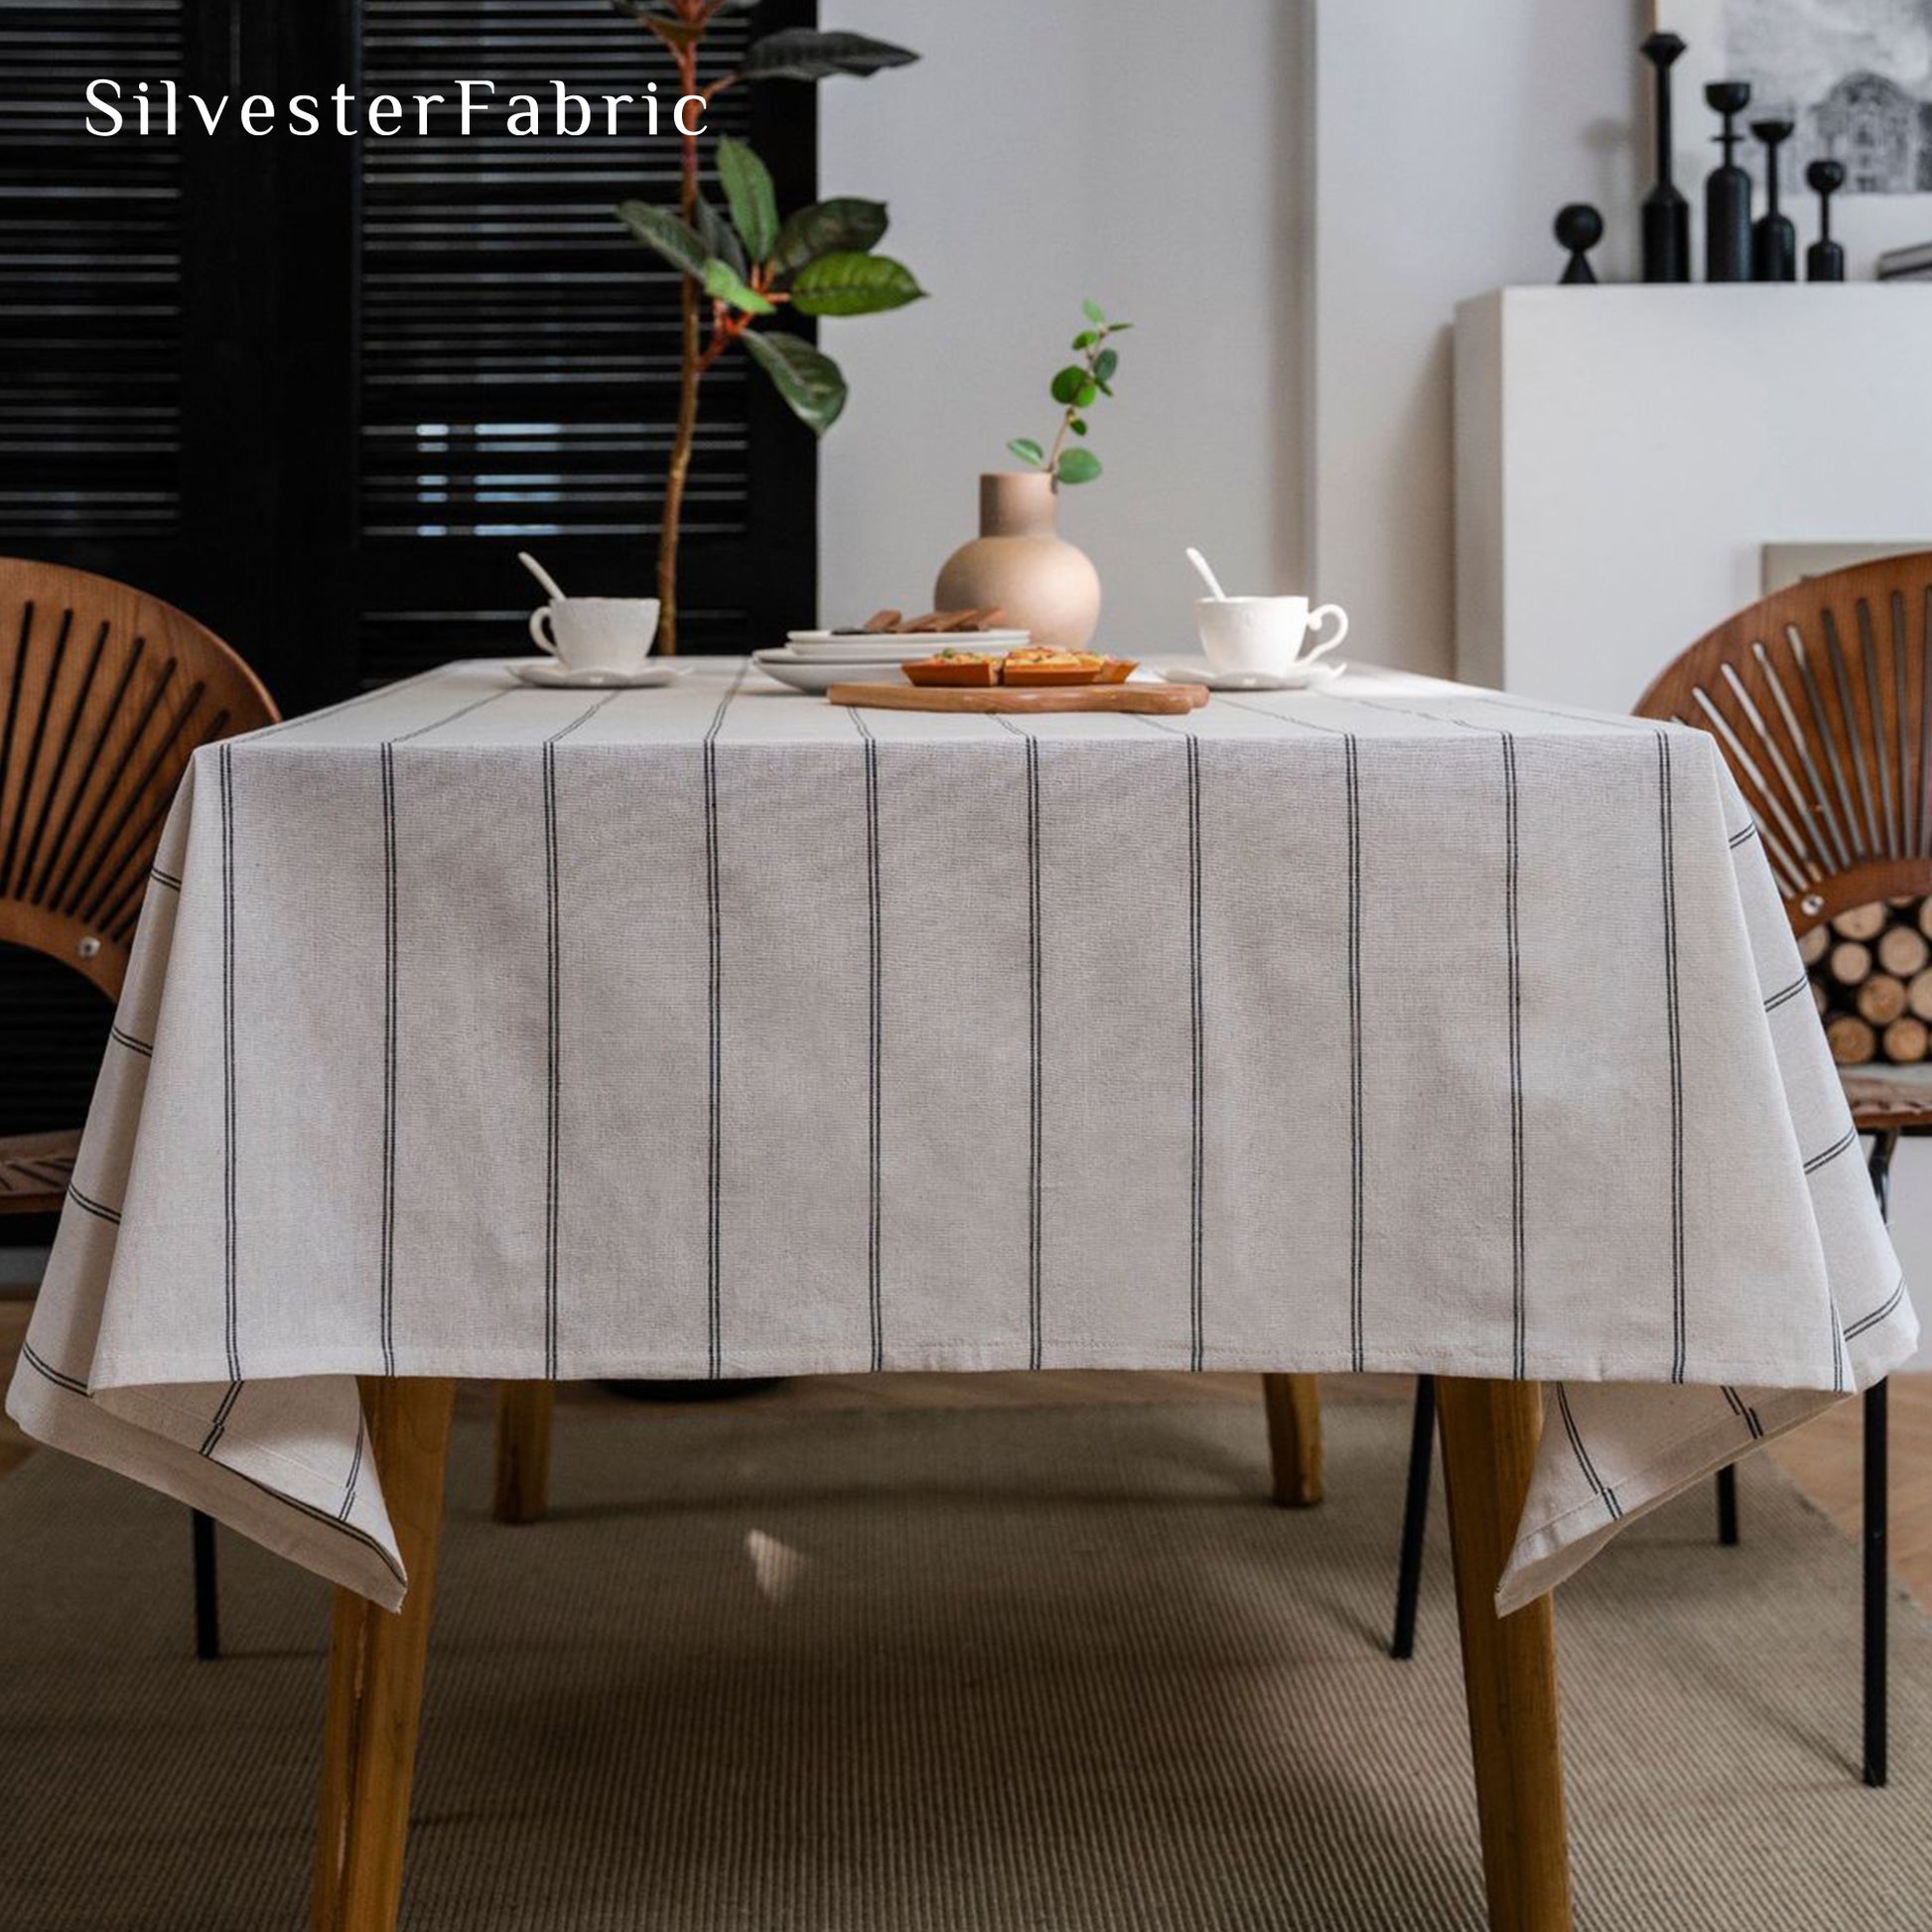 Striped Square Tablecloth丨Free Shipping - Silvester Fabric